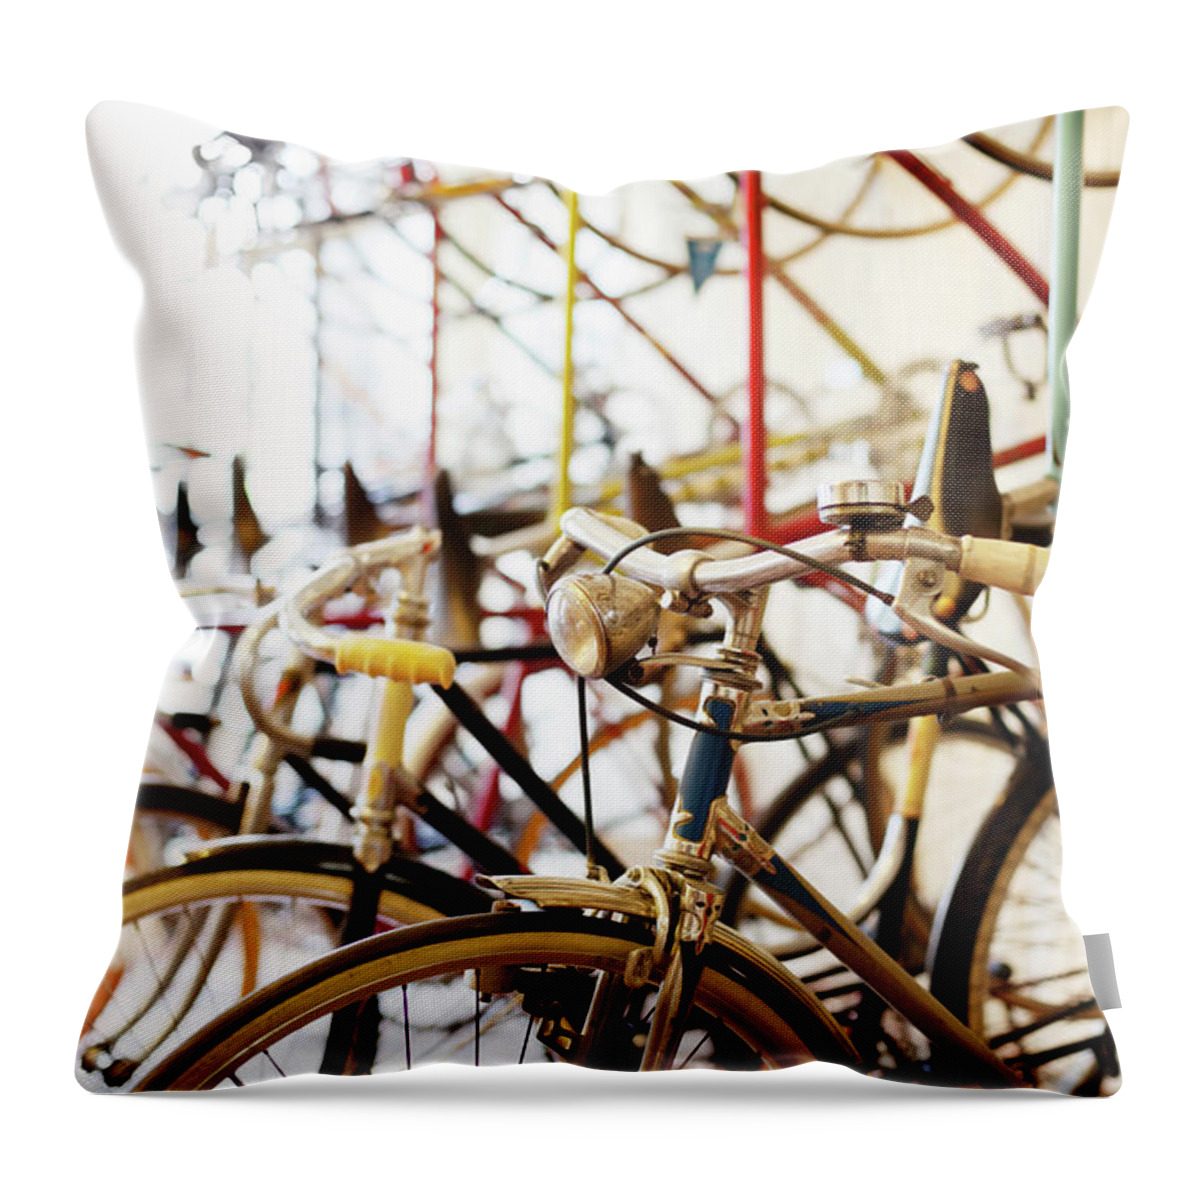 Berlin Throw Pillow featuring the photograph Bicycles Parked In A Bike Shop by Alvarez